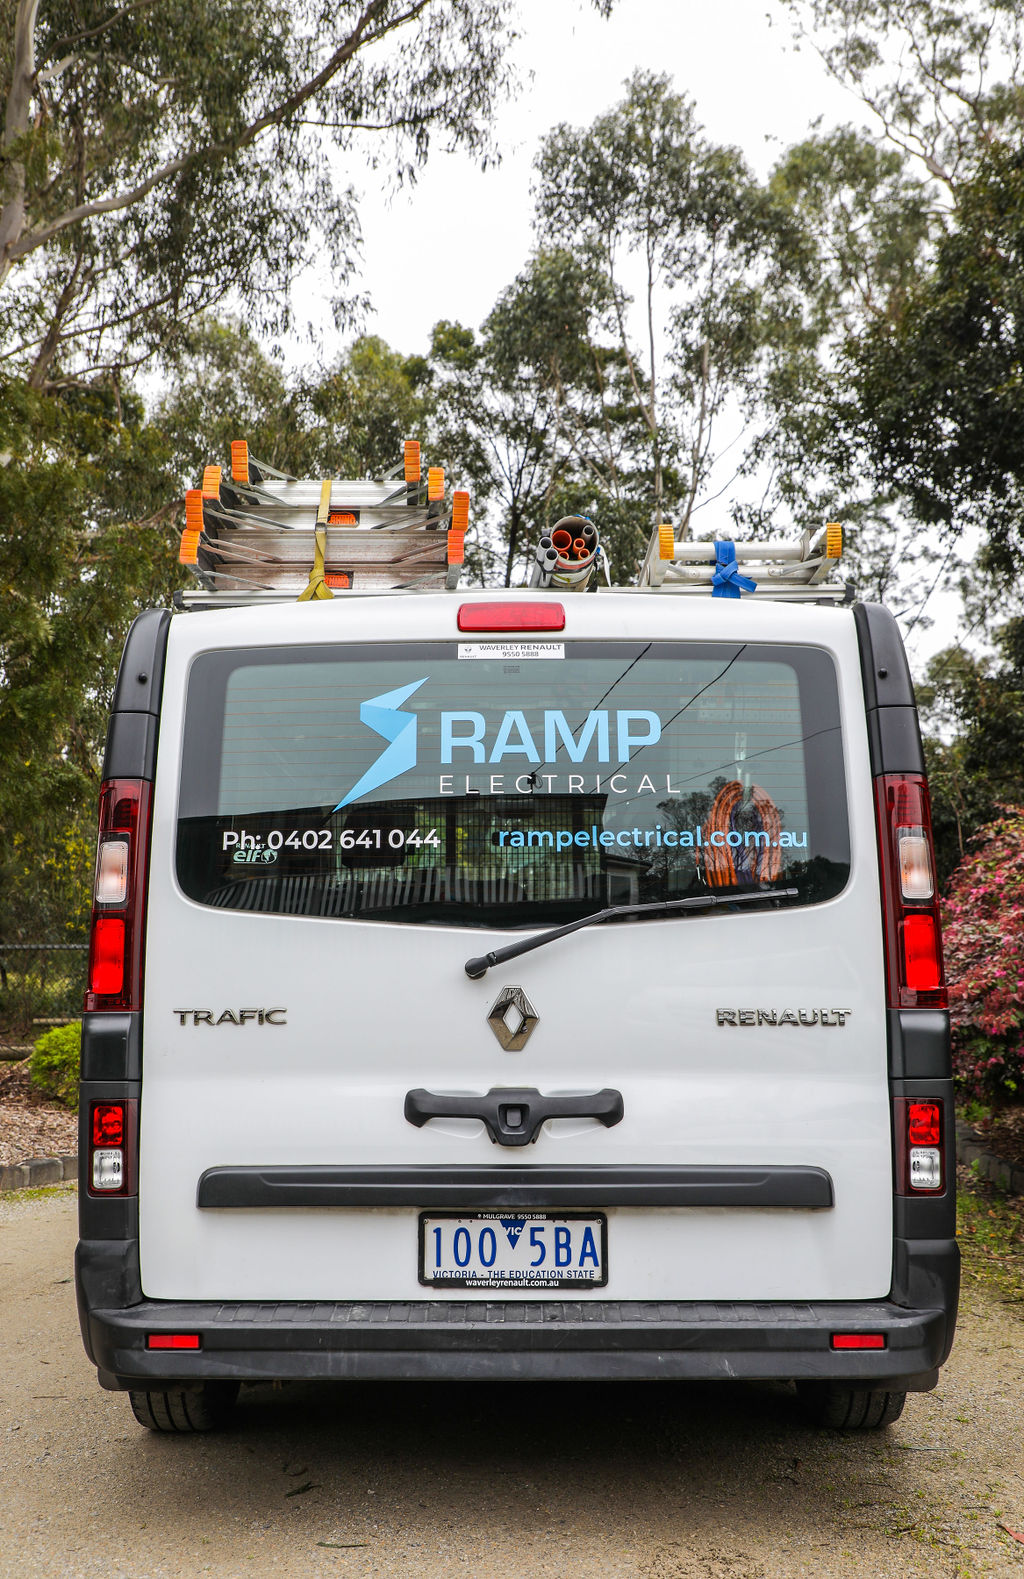 https://rampelectrical.com.au/commercial/electrical-diagnosis-repairs/